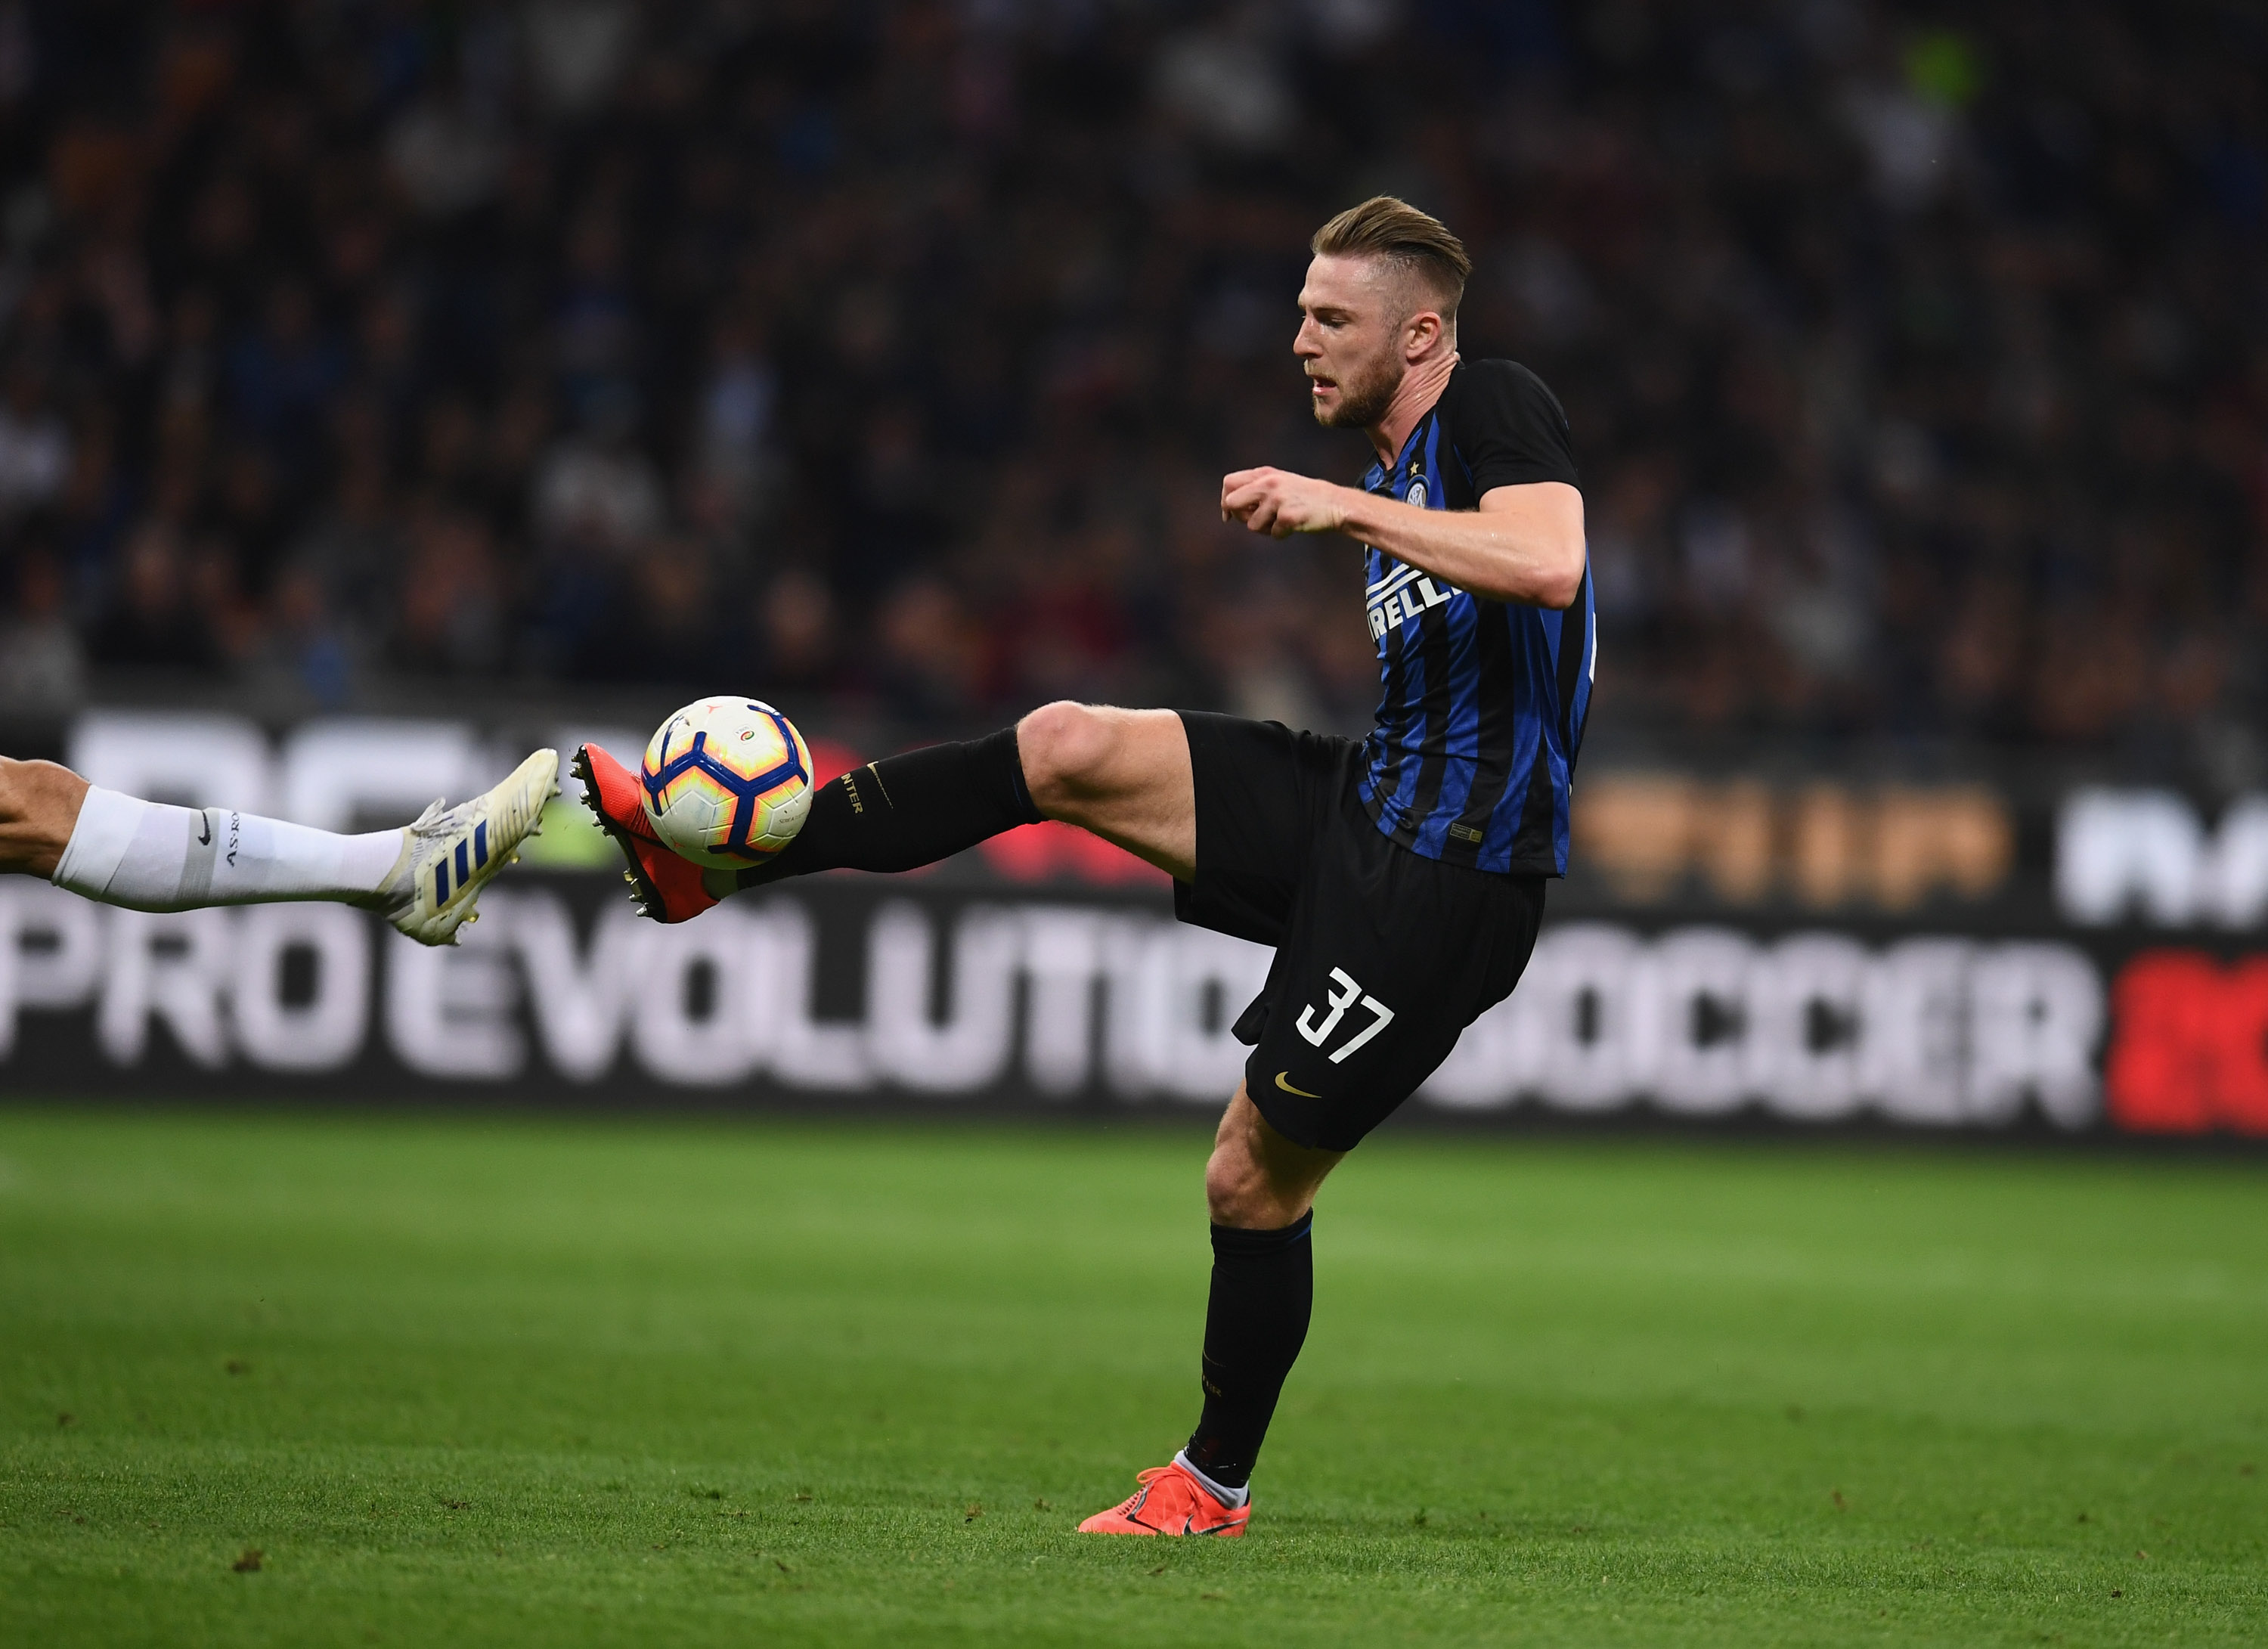 MILAN, ITALY - APRIL 20:  Milan Skriniar of FC Internazionale in action during the Serie A match between FC Internazionale and AS Roma at Stadio Giuseppe Meazza on April 20, 2019 in Milan, Italy.  (Photo by Claudio Villa - Inter/Inter via Getty Images)